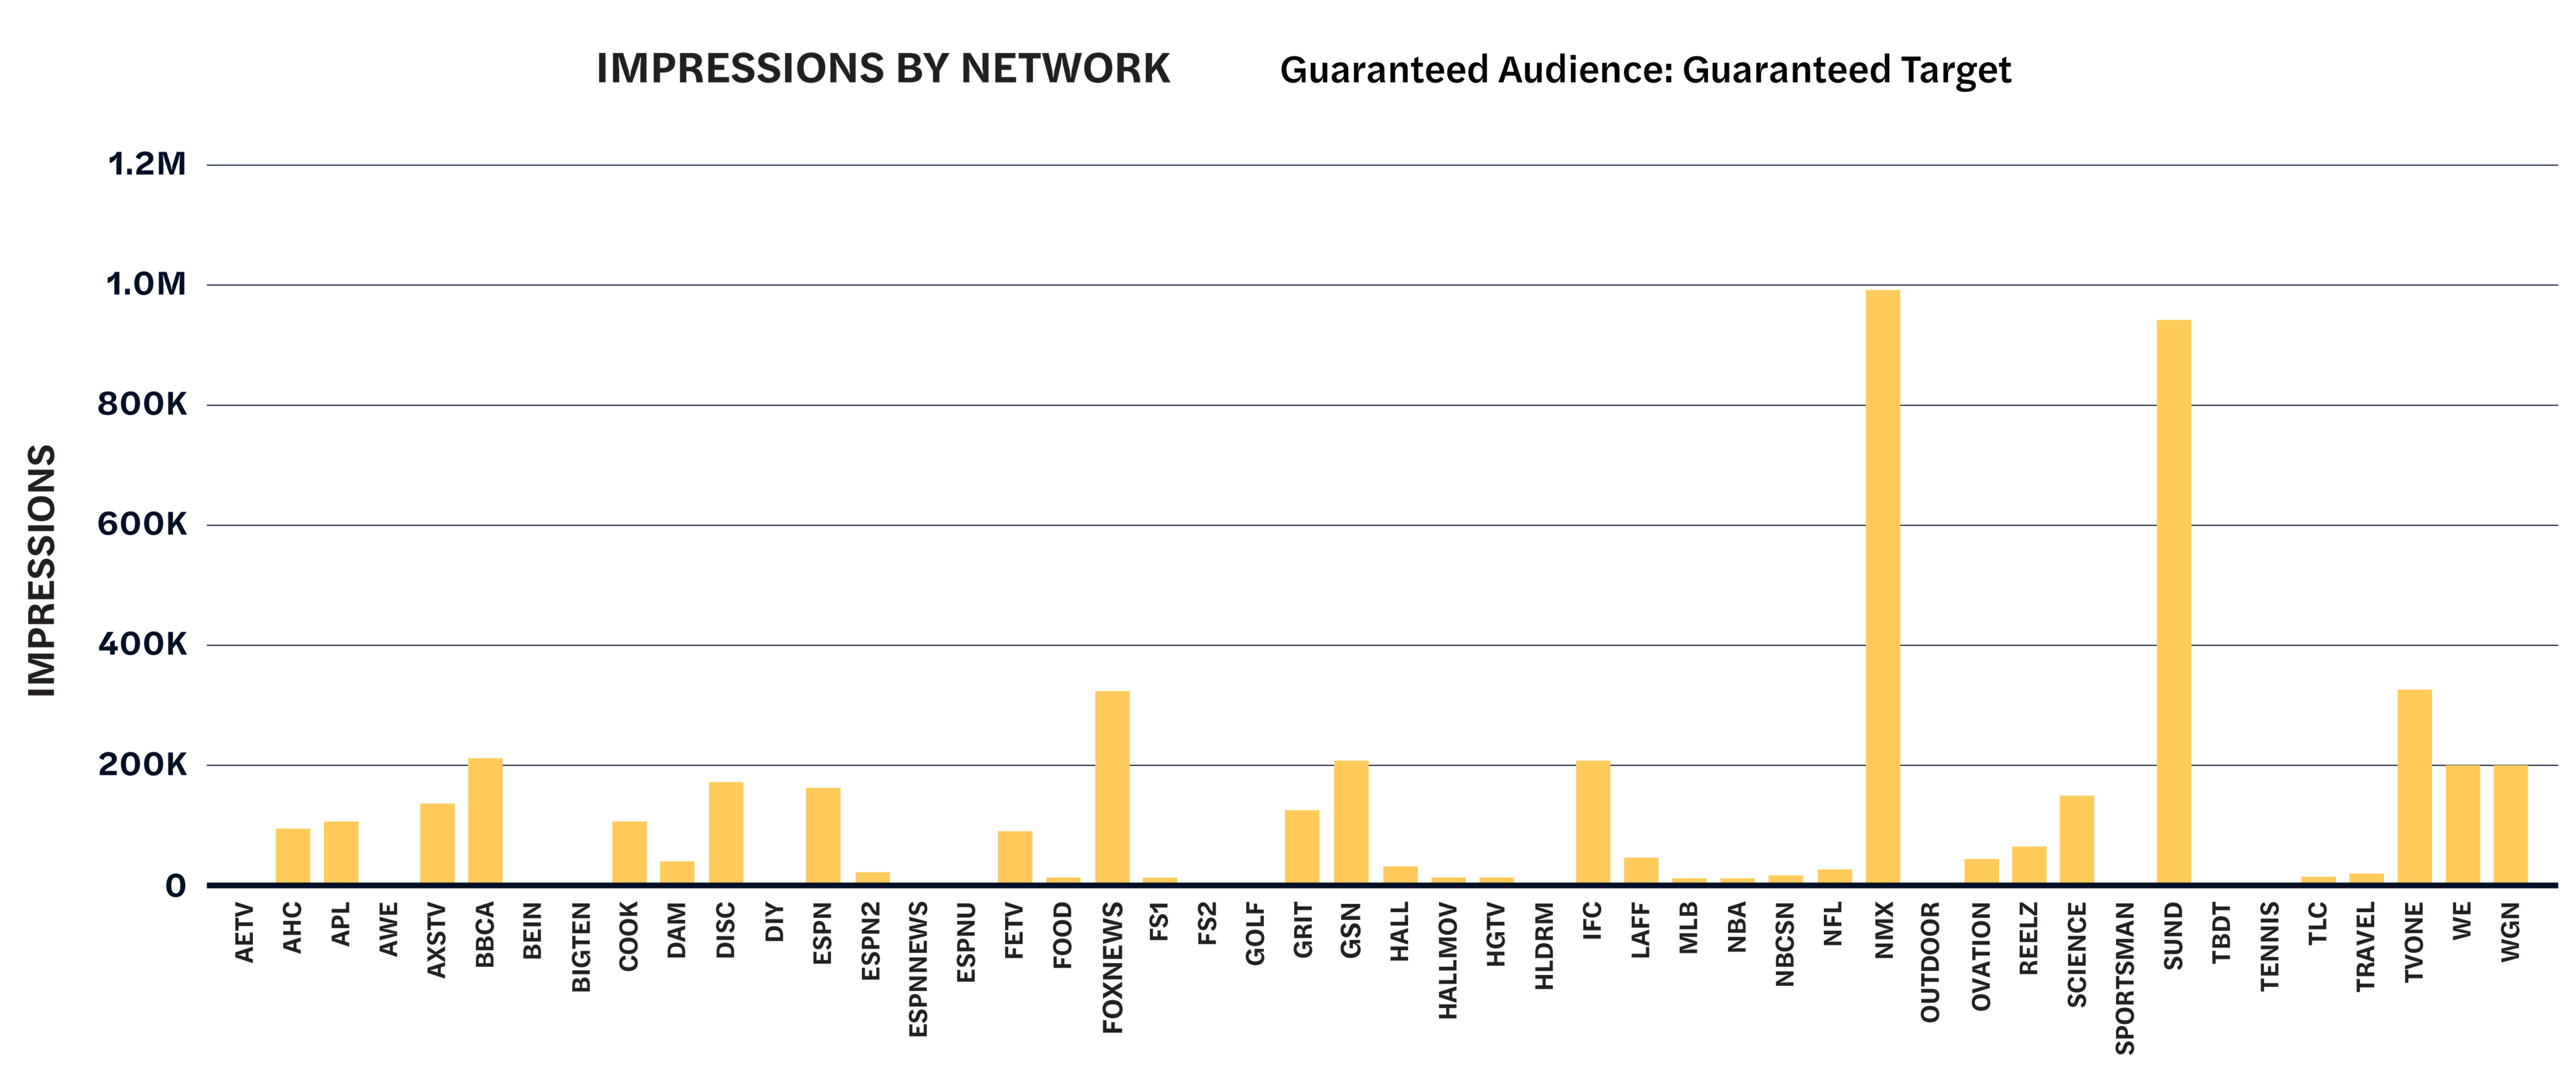 TV advertising case study bar chart showing impression delivery by network.